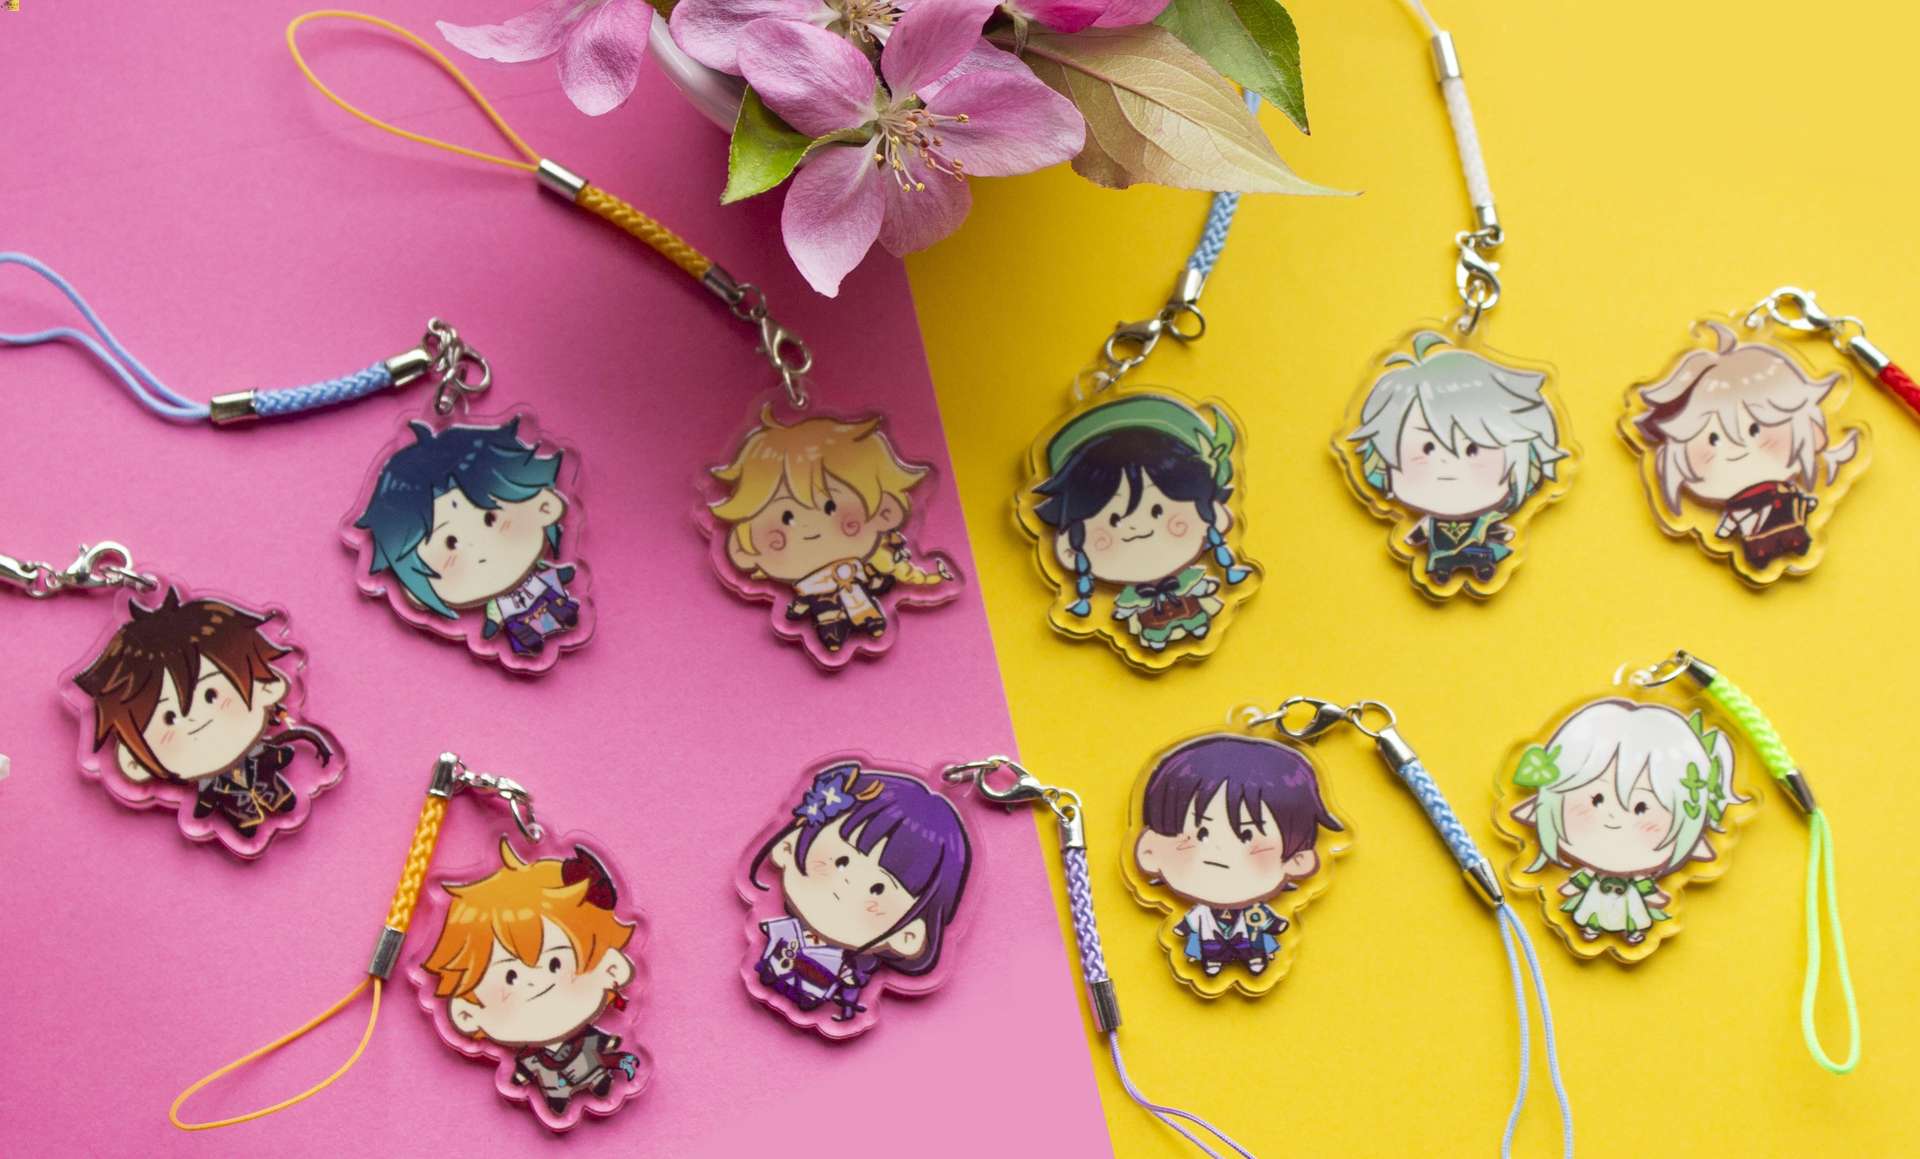 Anime-Inspired Crafts: Crafting Phone Charms With Anime Themes